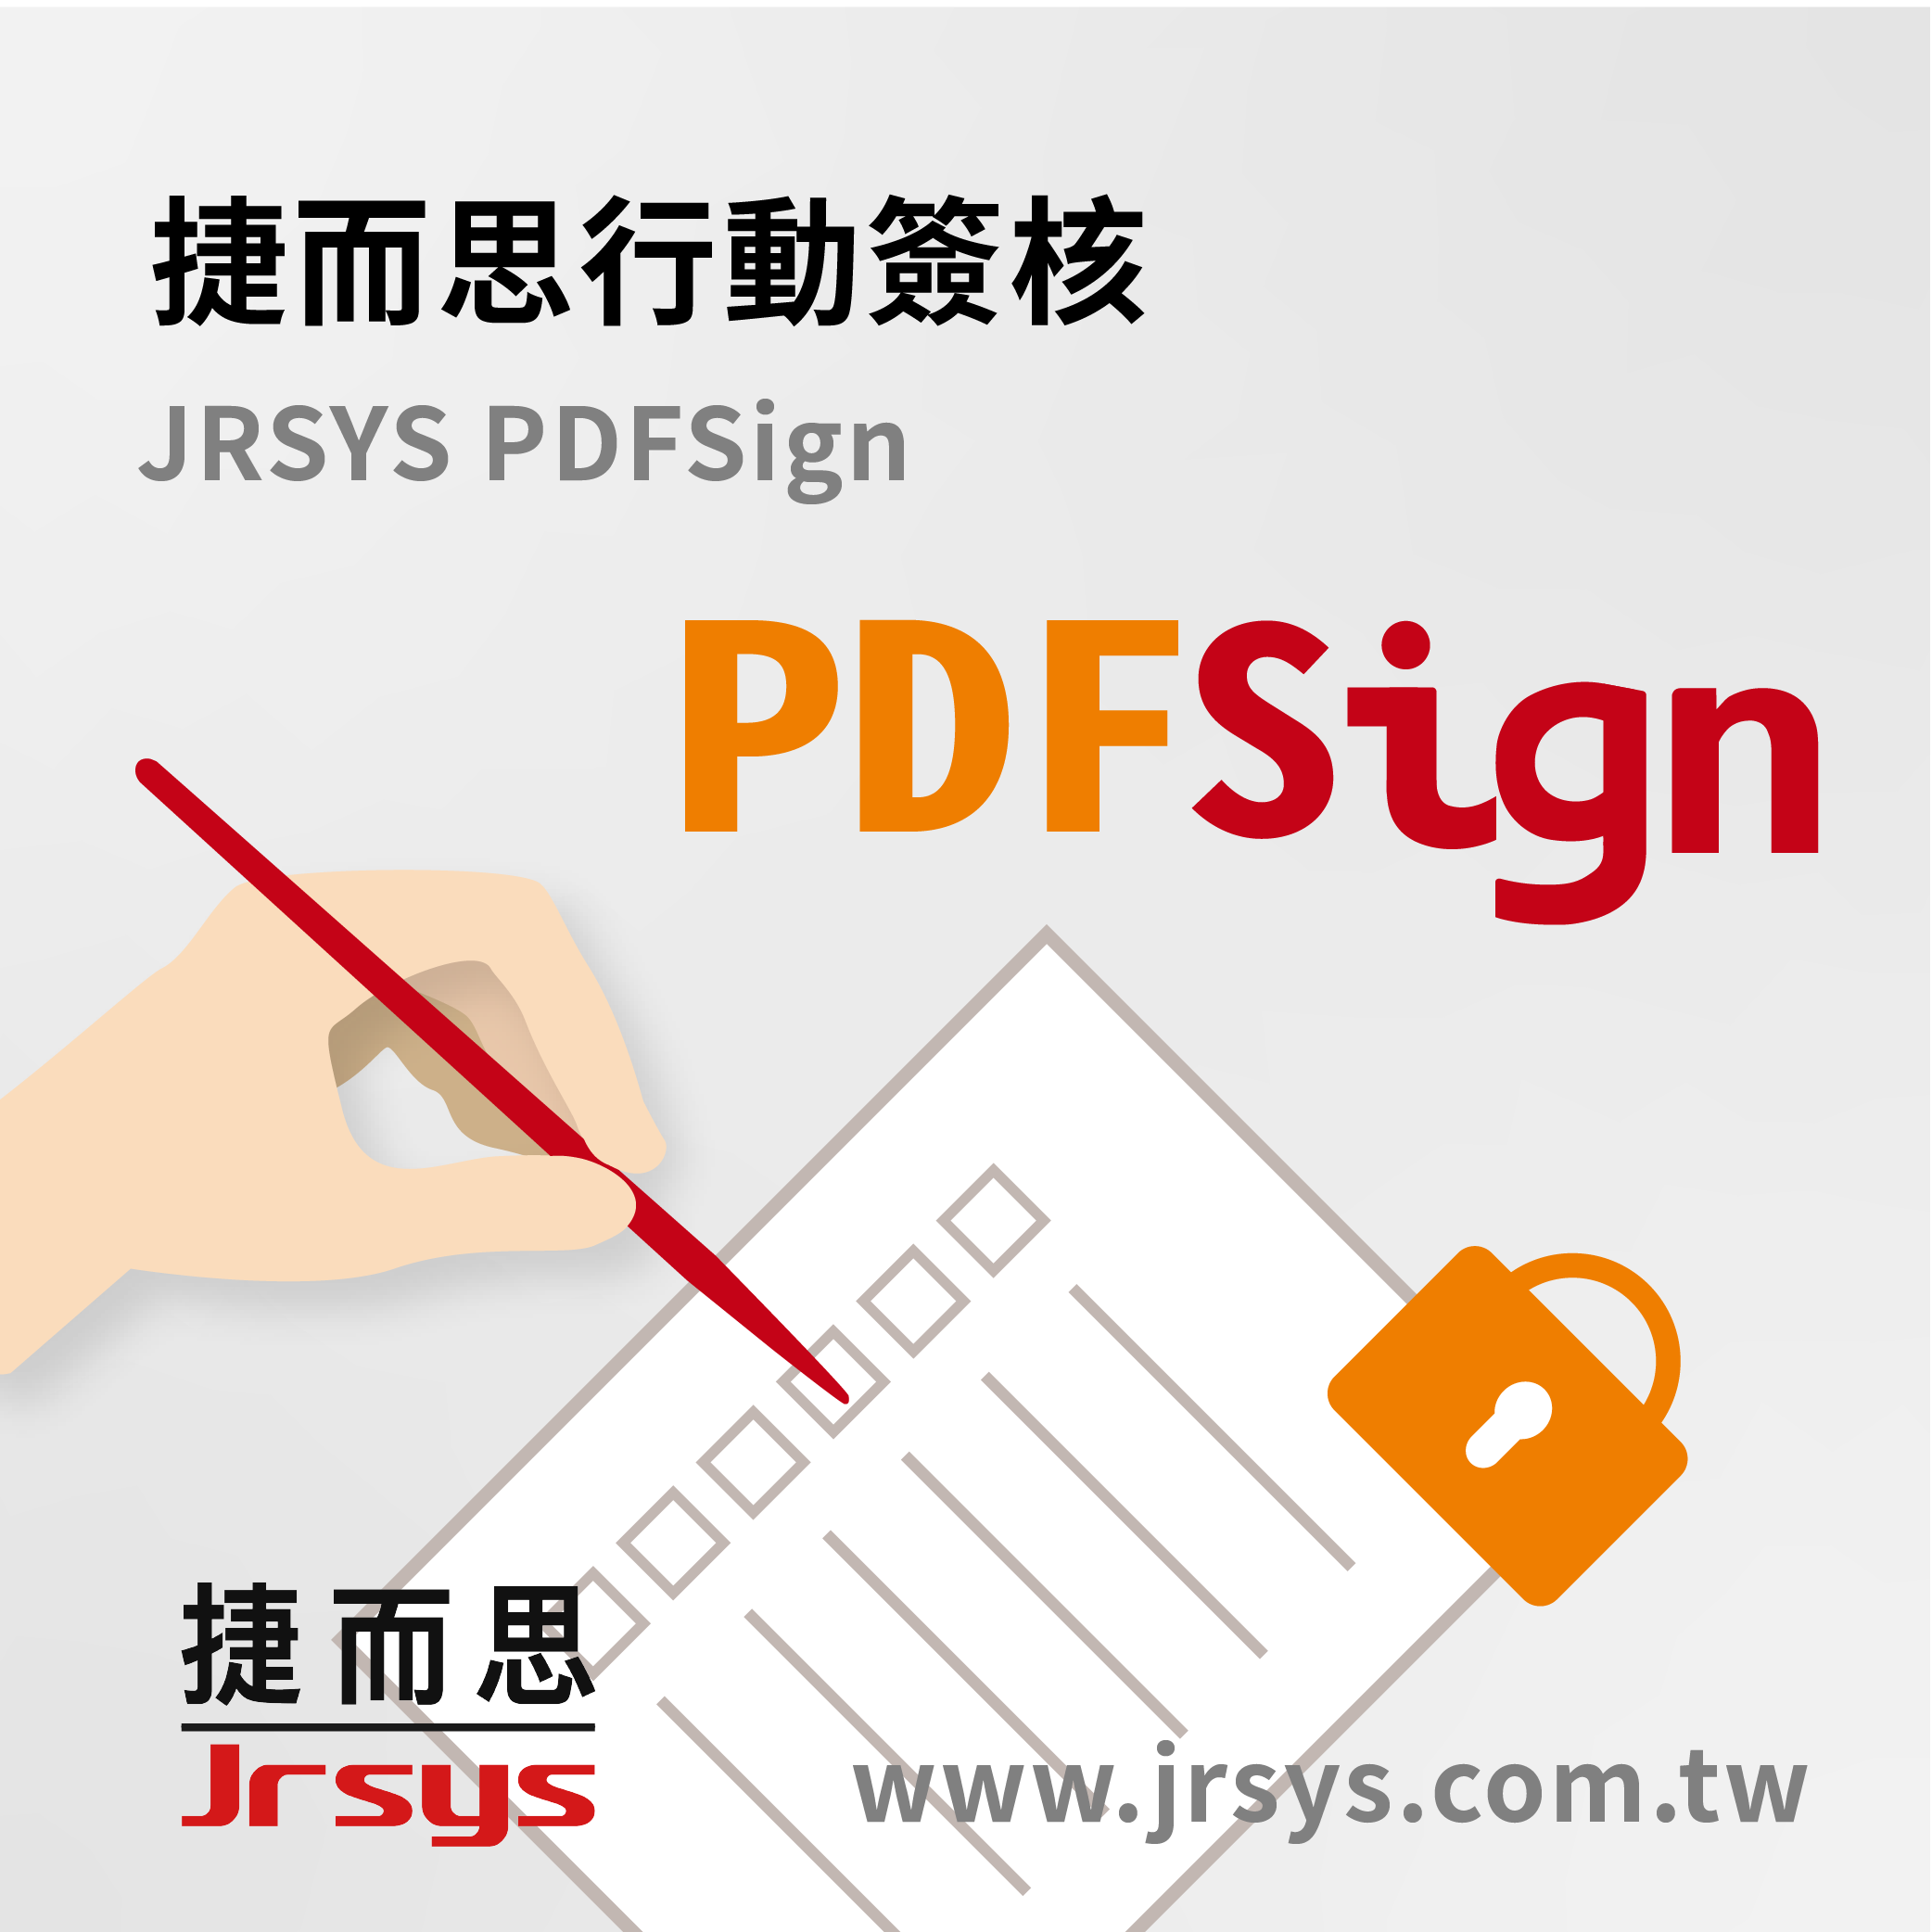 JRSYS PDFSign